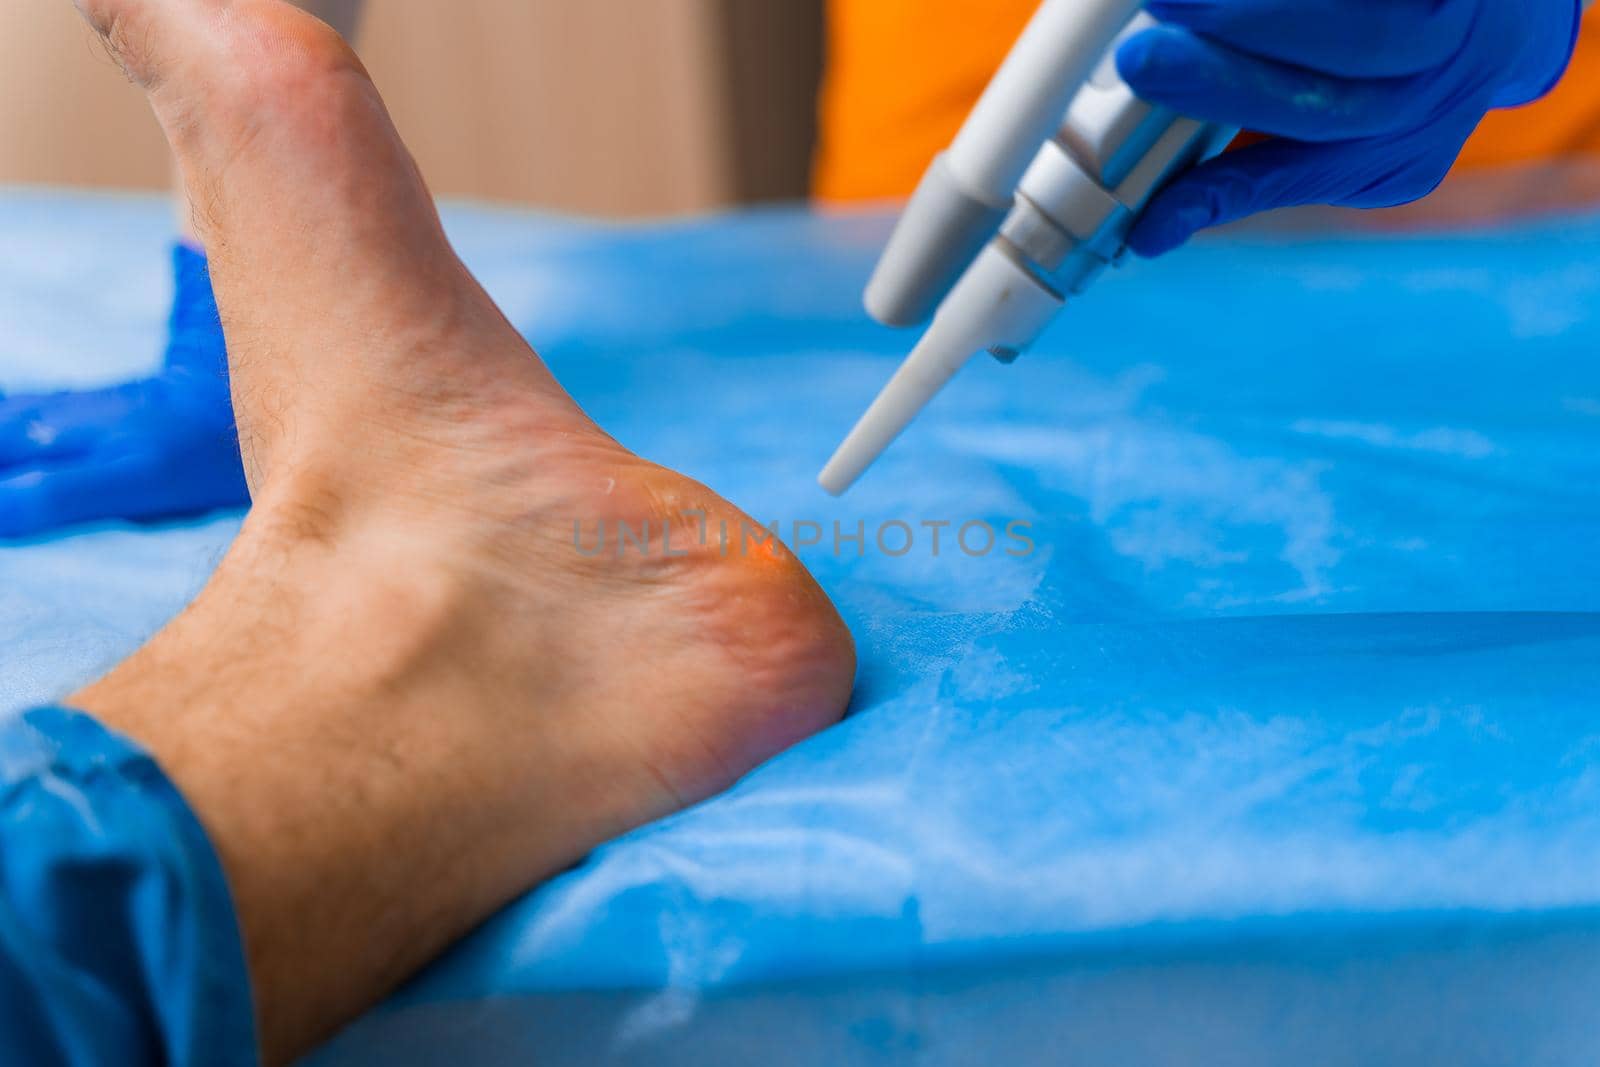 Laser removal of warts on the foot. Medical dermatological surgery in the clinic.